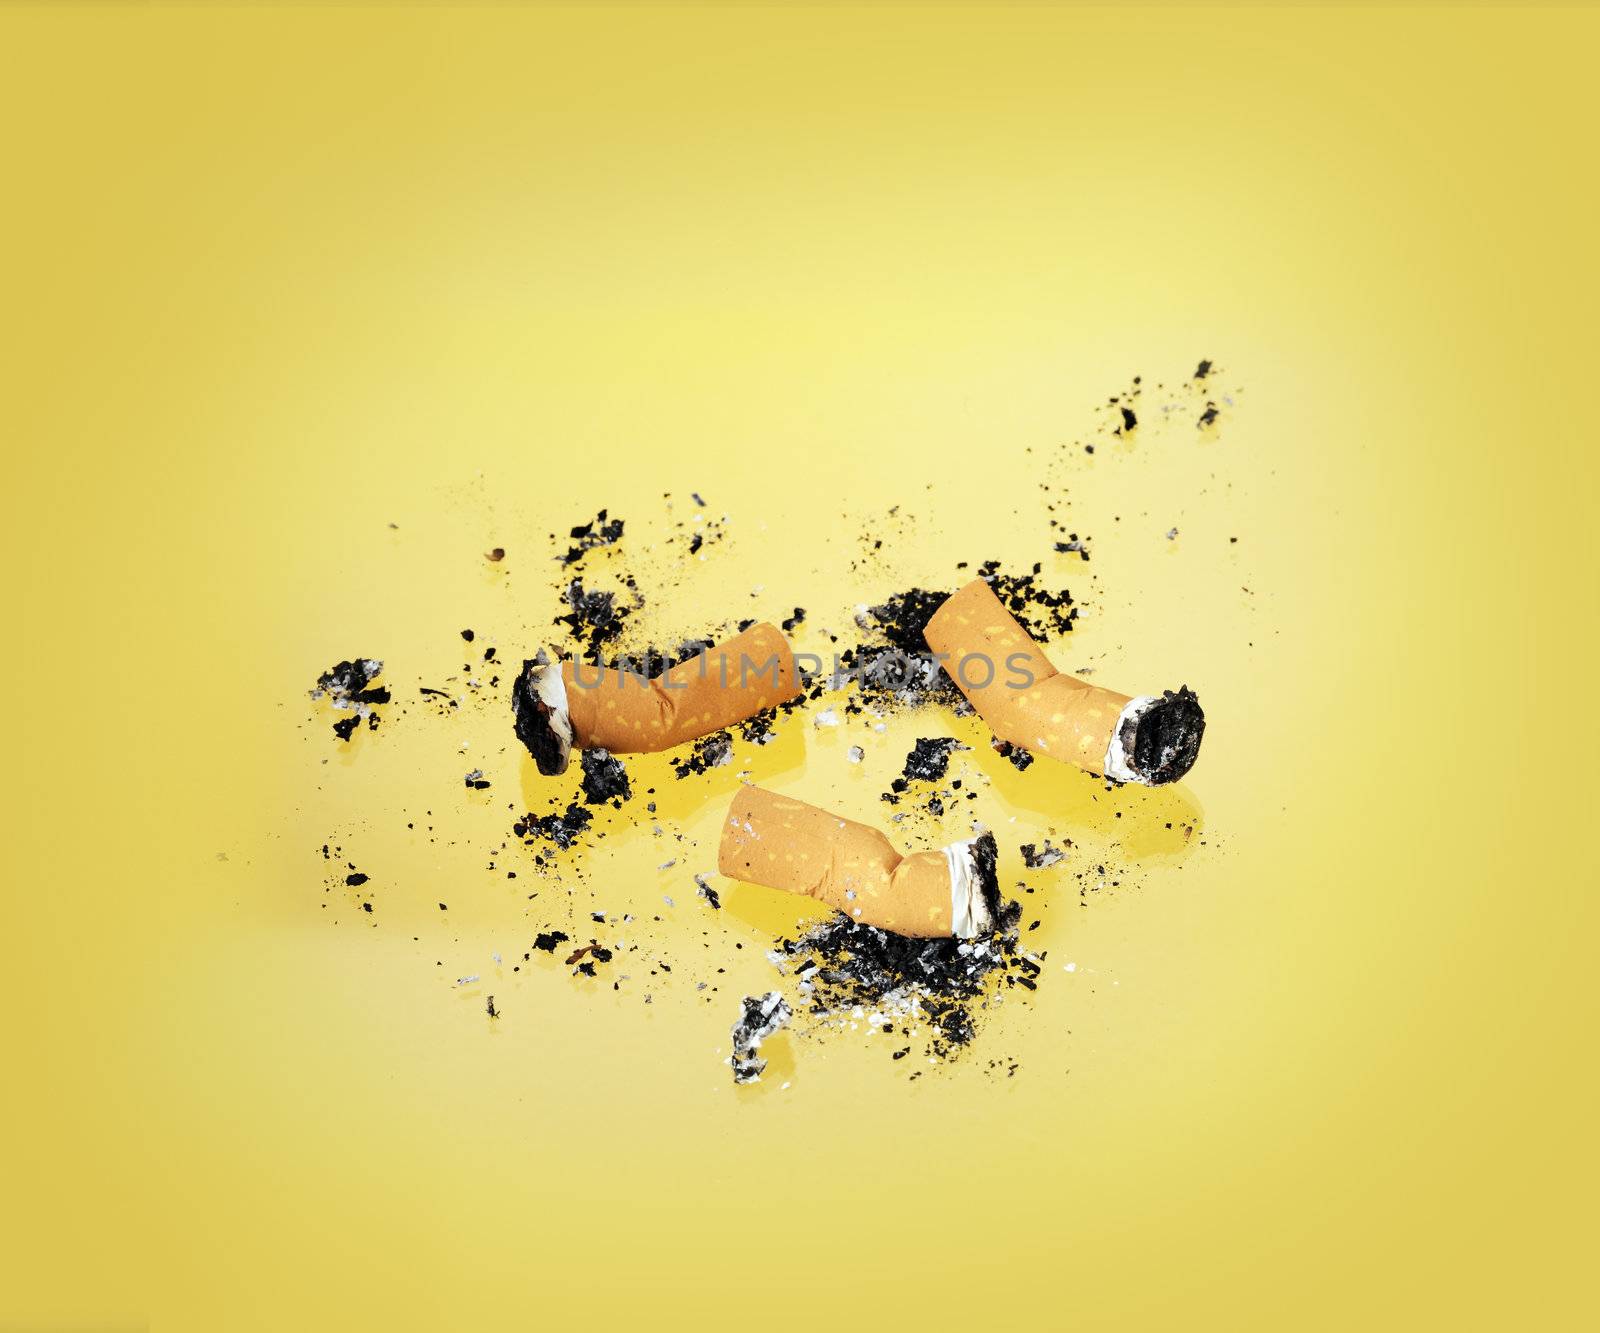 Burnt cigarette butts on yellow background.